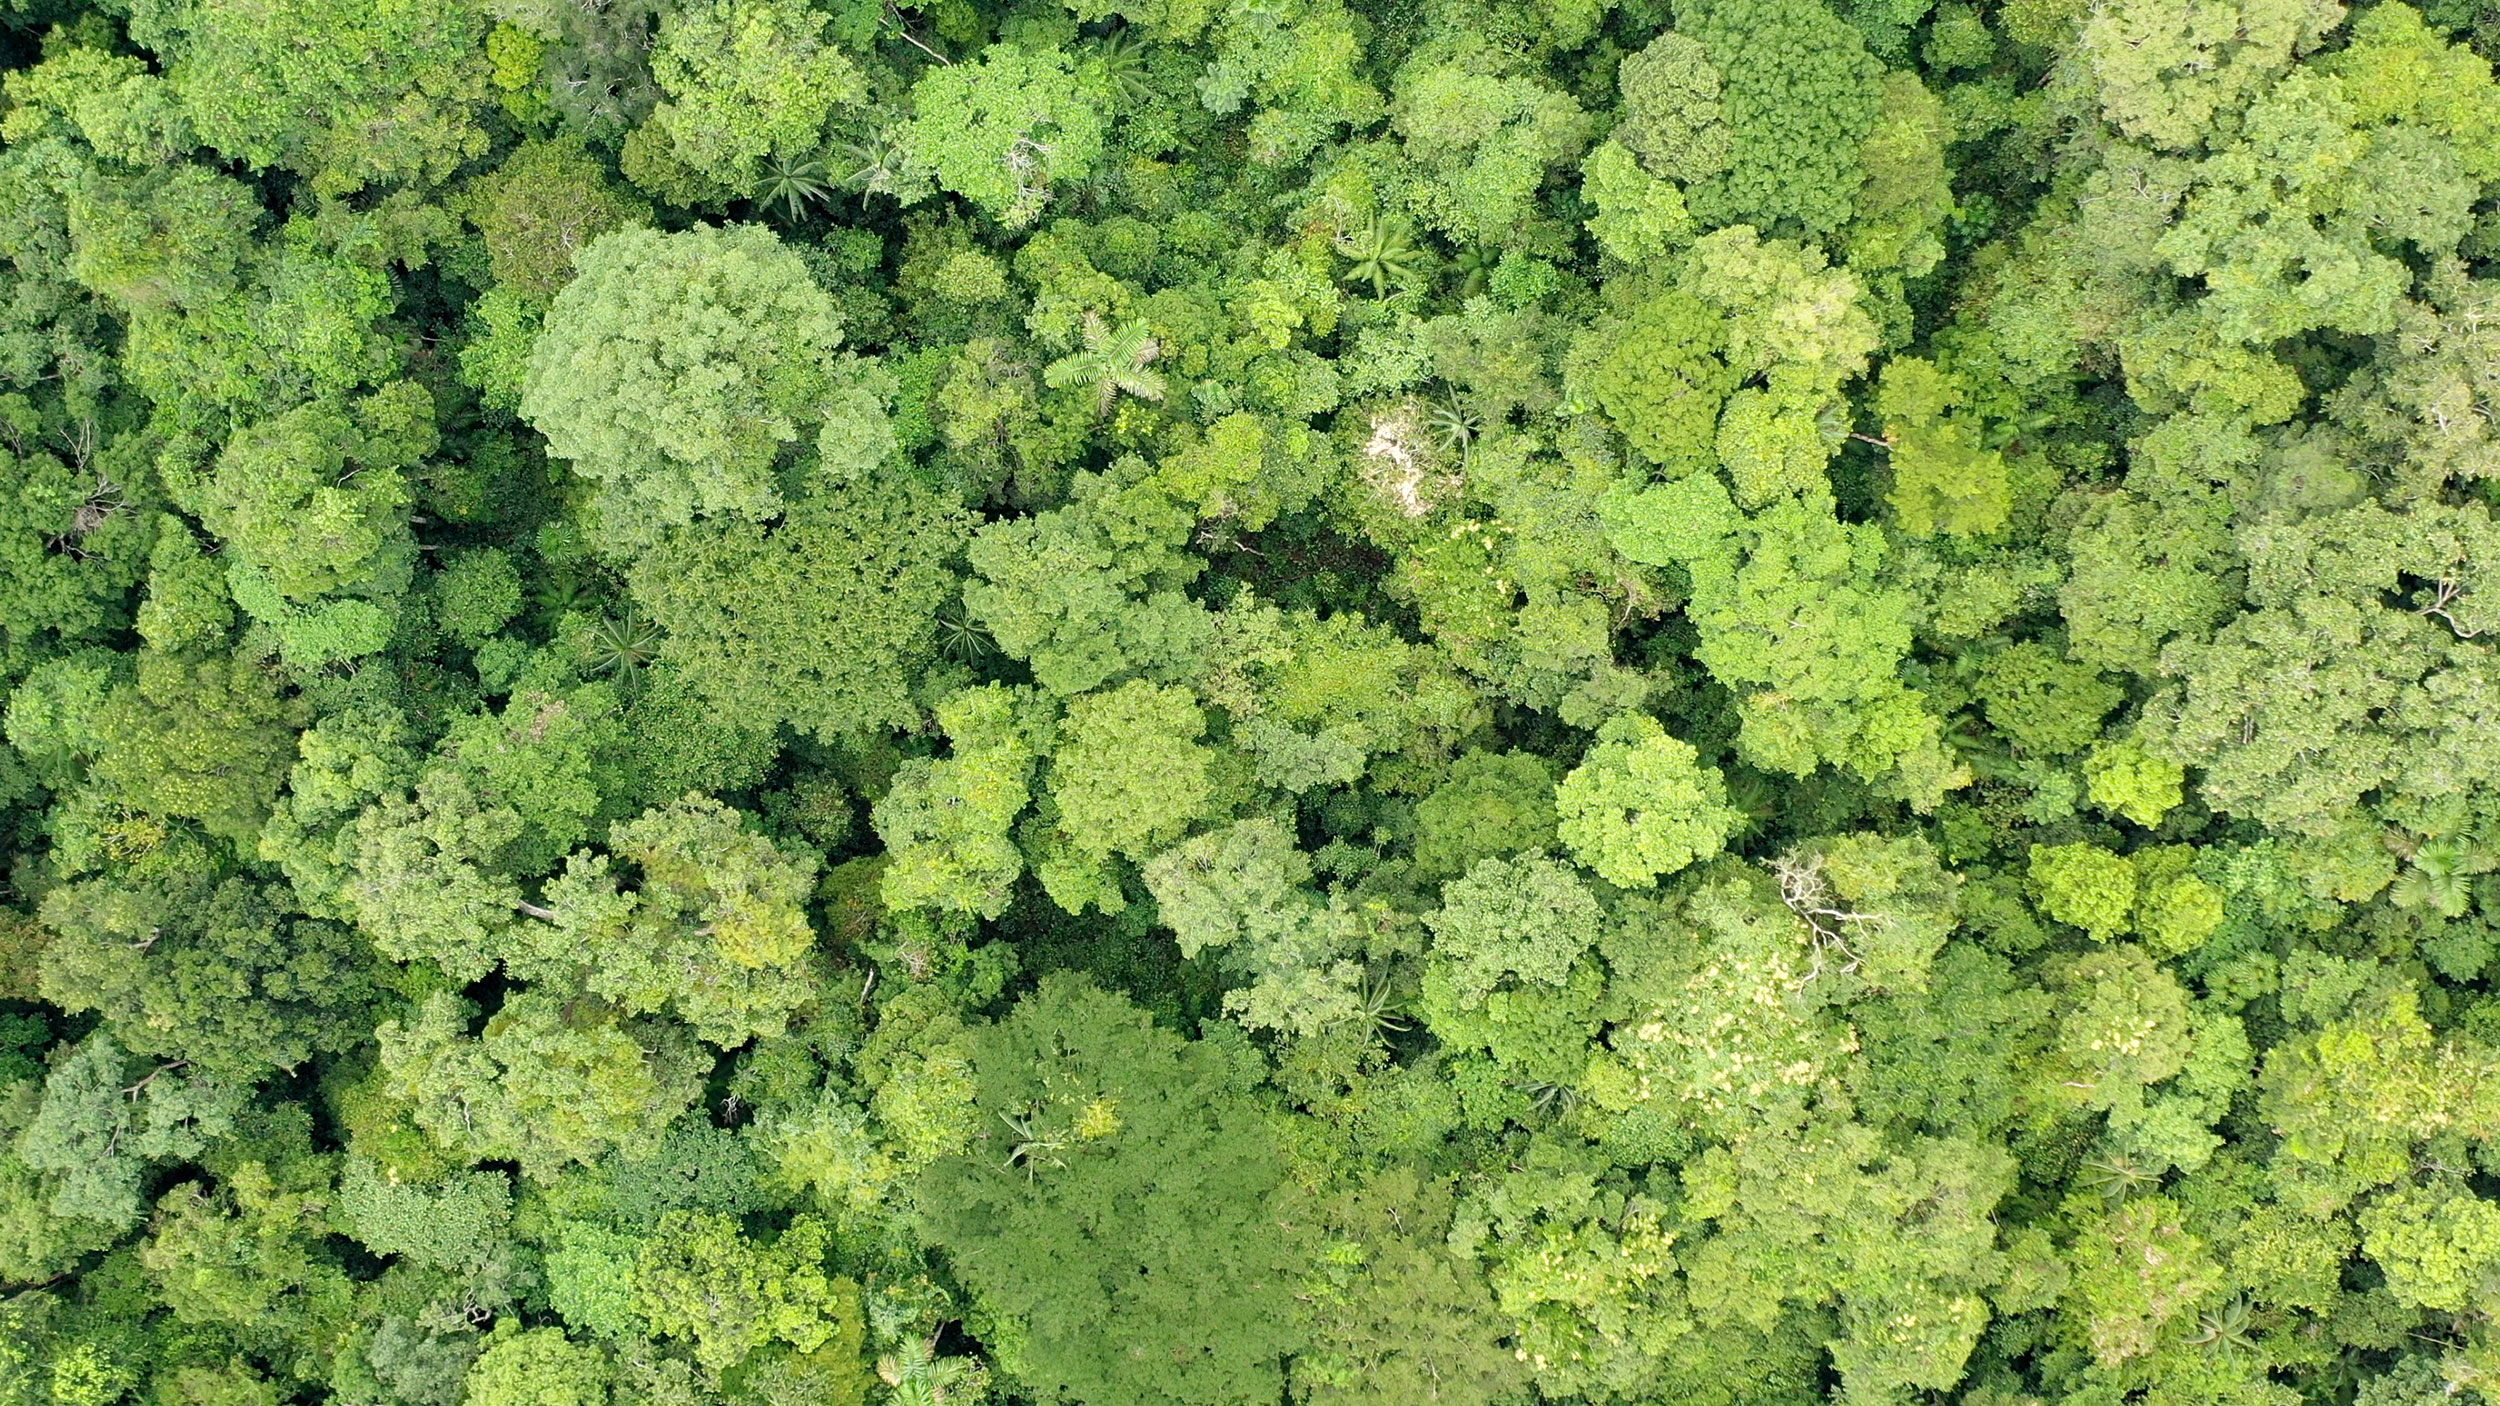 Helping to protect the rainforest in Peru with drone mapping